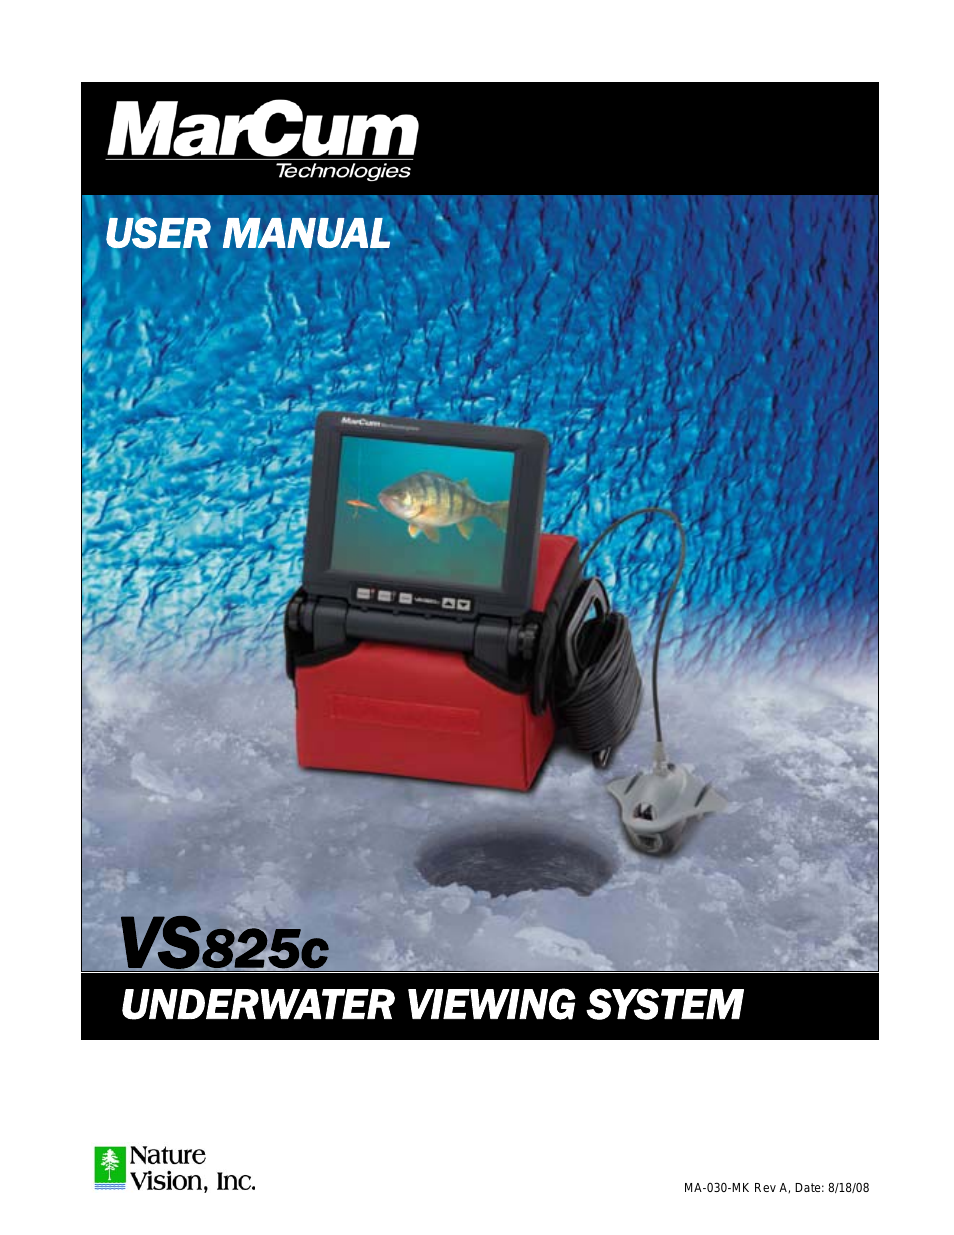 Underwater Viewing System VS825 (Page 1)